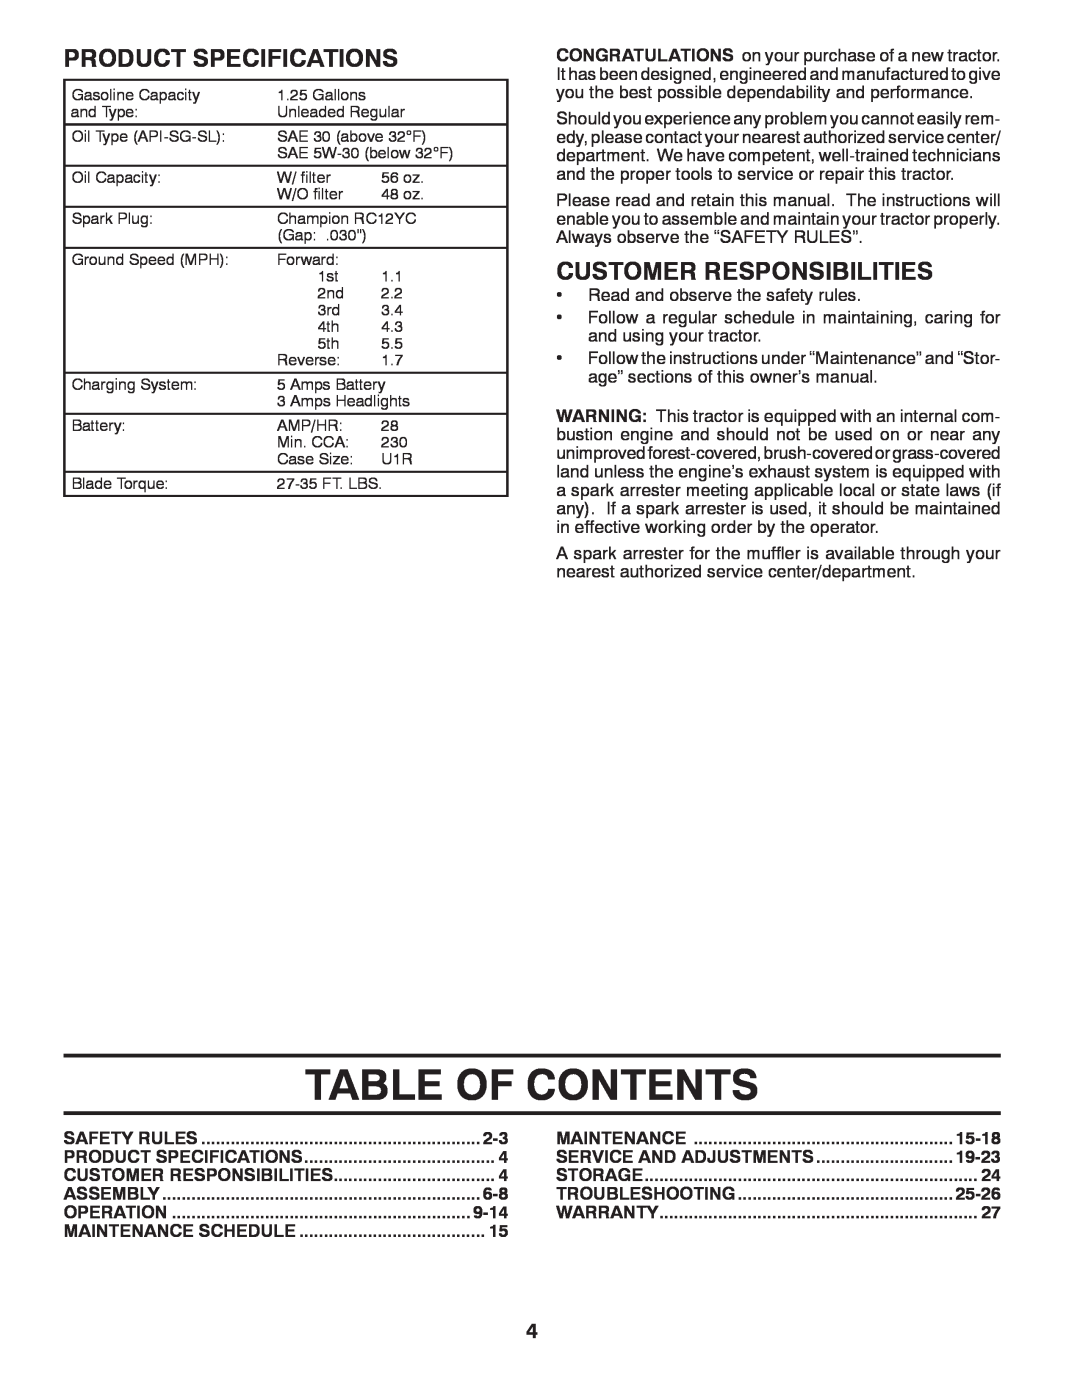 Poulan PO15542LT manual Table Of Contents, Product Specifications, Customer Responsibilities 